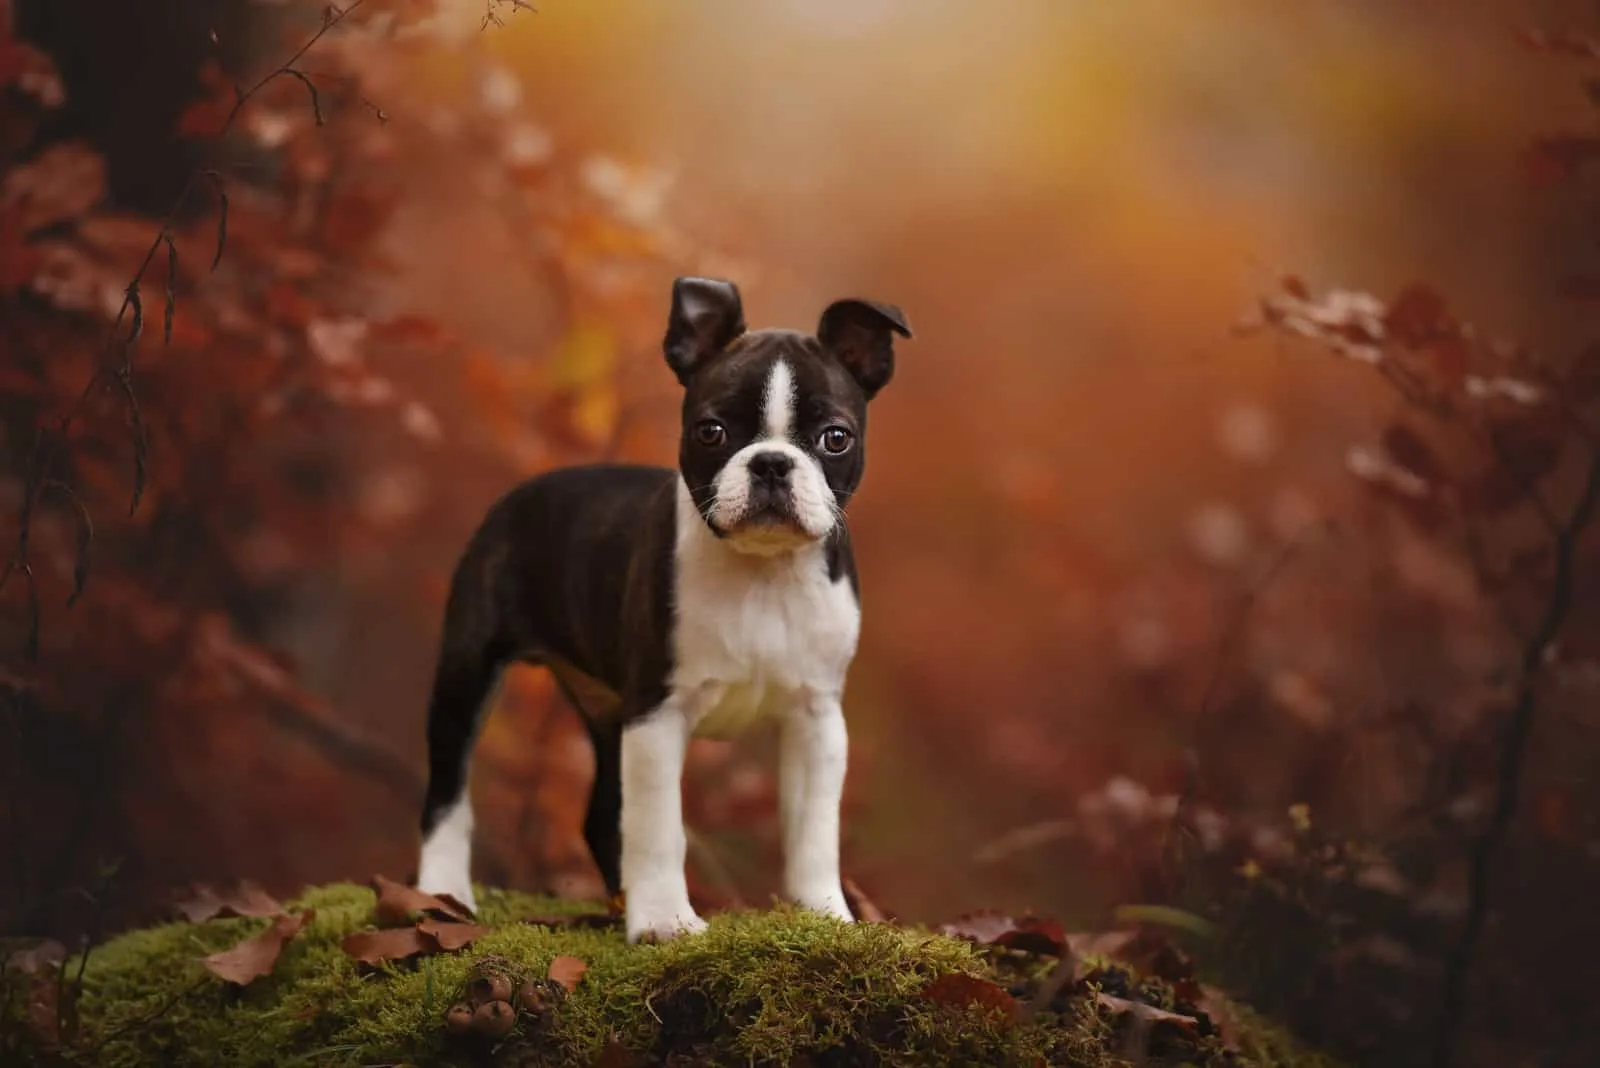 The Boston Terrier stands in the woods